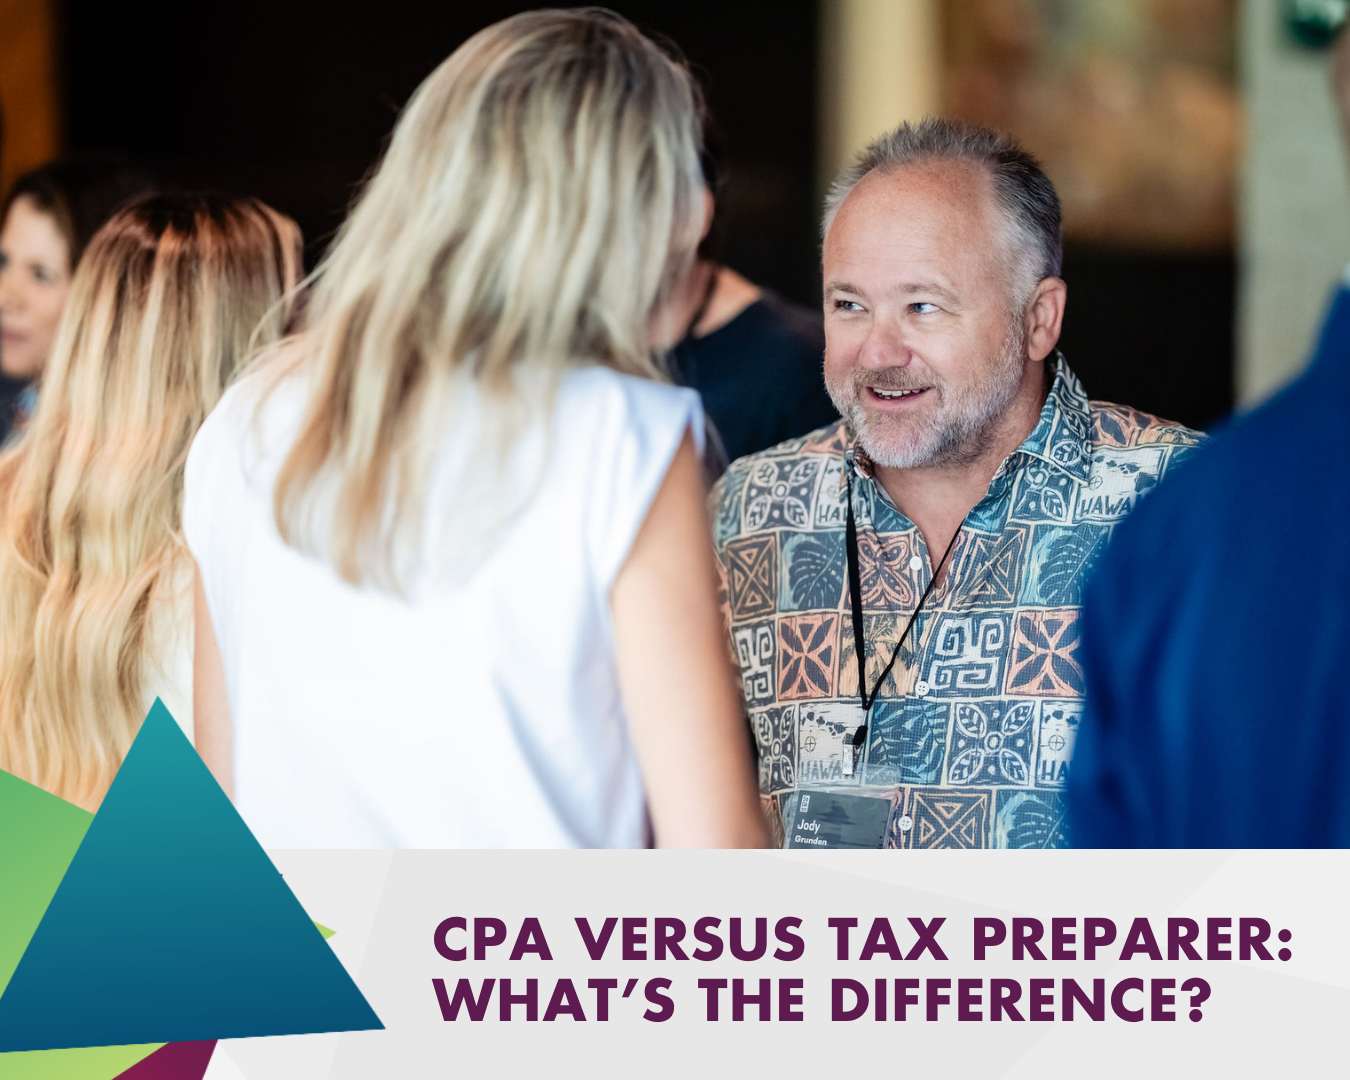 CPA Versus Tax Preparer: What’s the Difference?